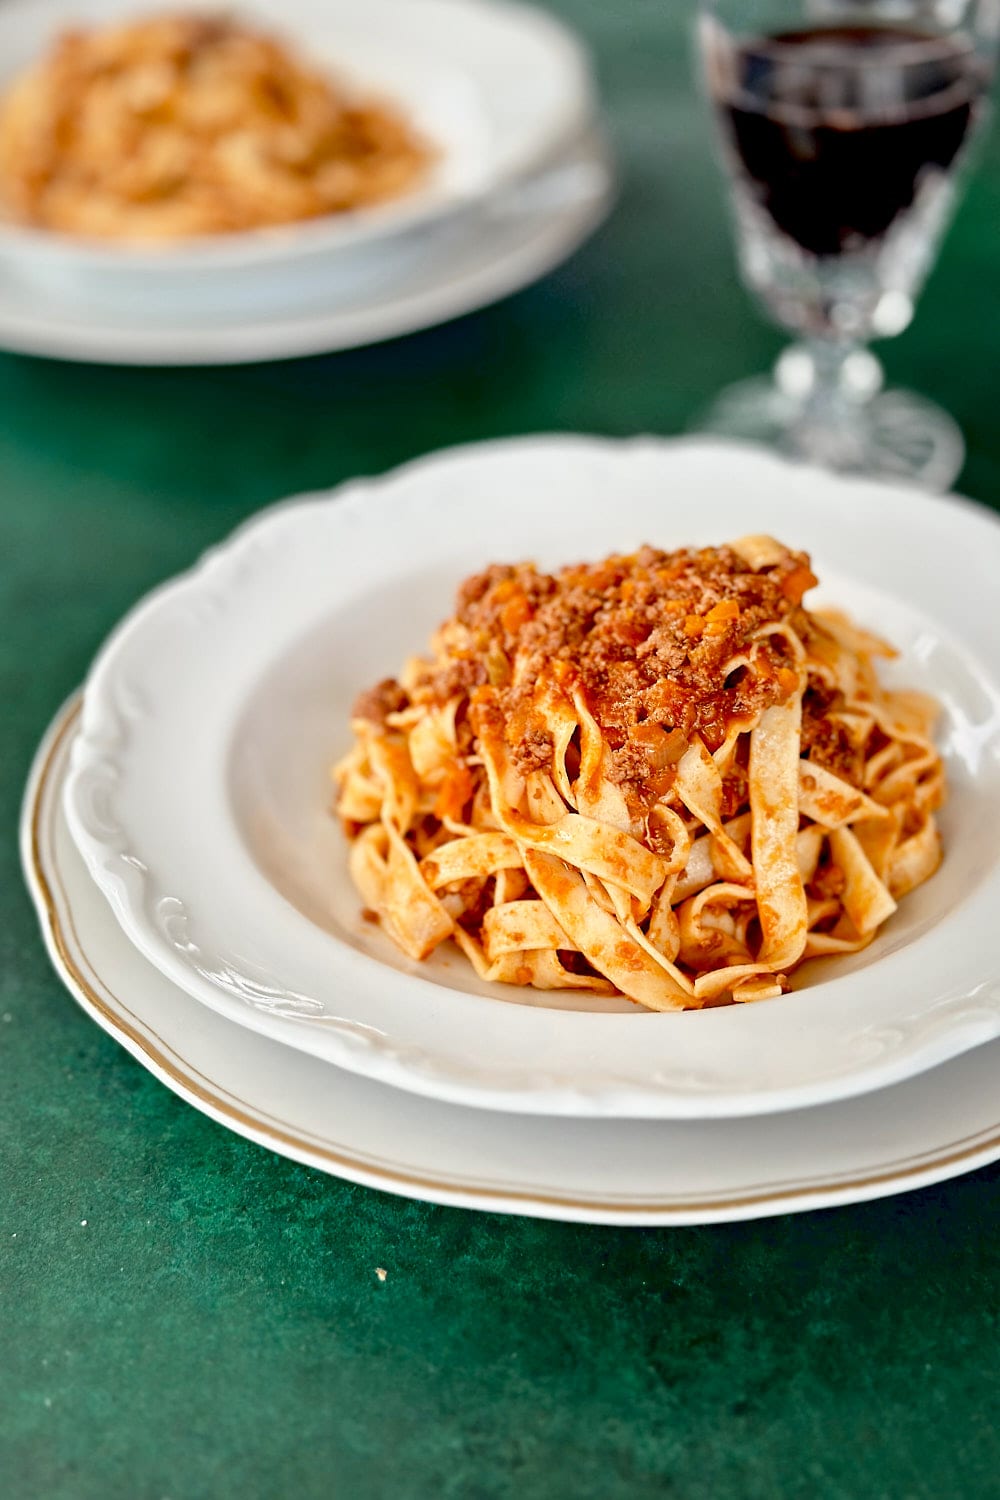 Two portions of homemade tagliatelle alla bolognese on a dark green table.